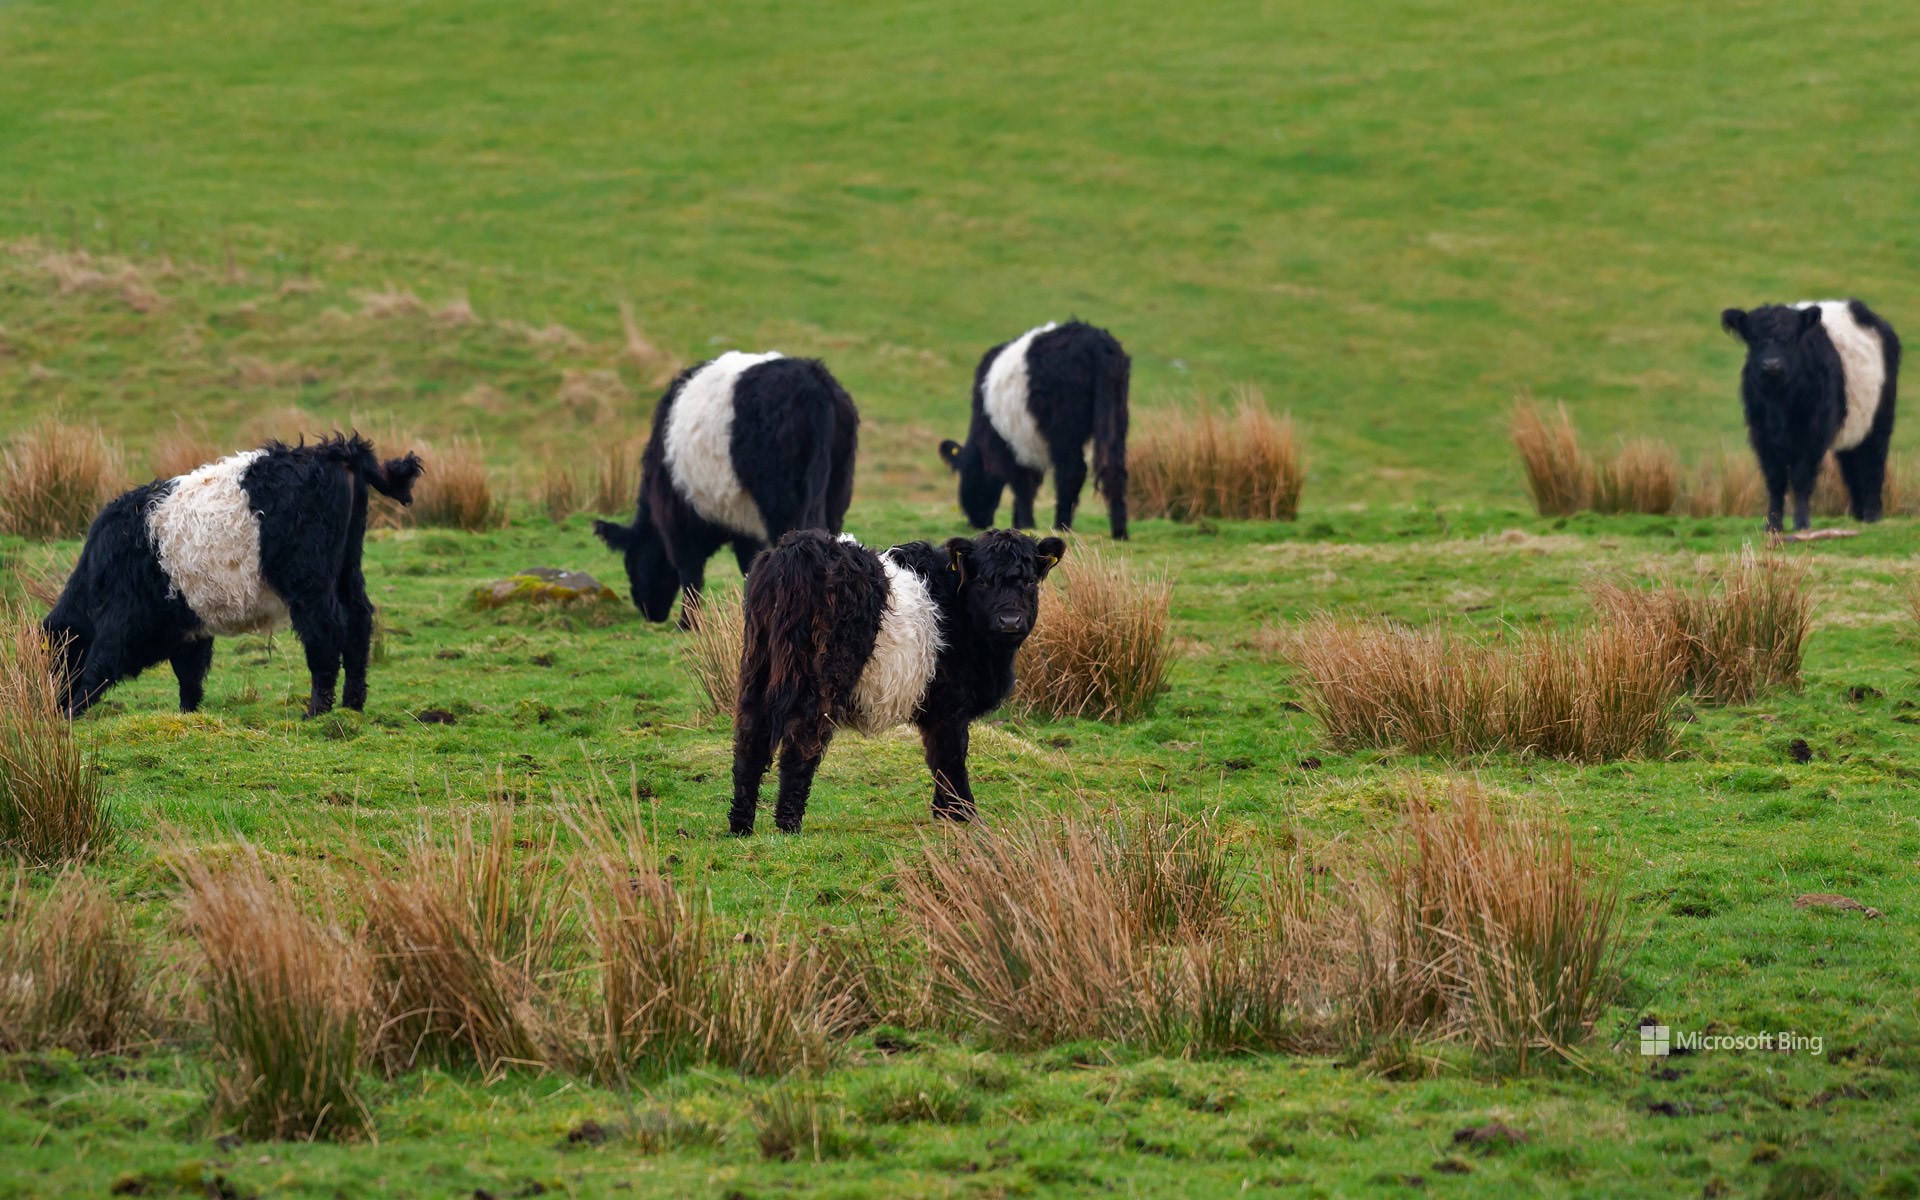 Belted Galloway cows in Galloway